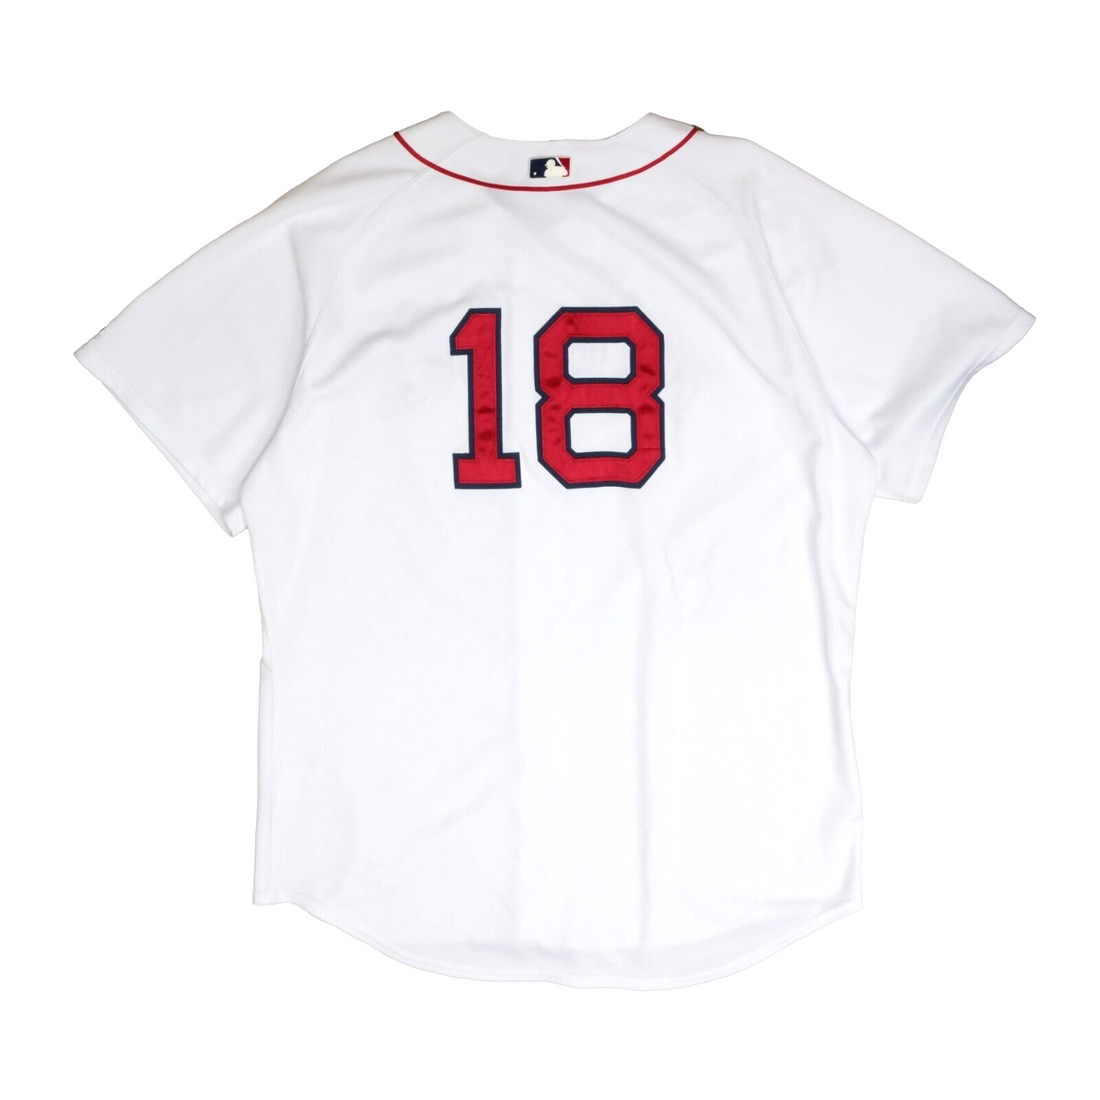 red sox jersey vintage